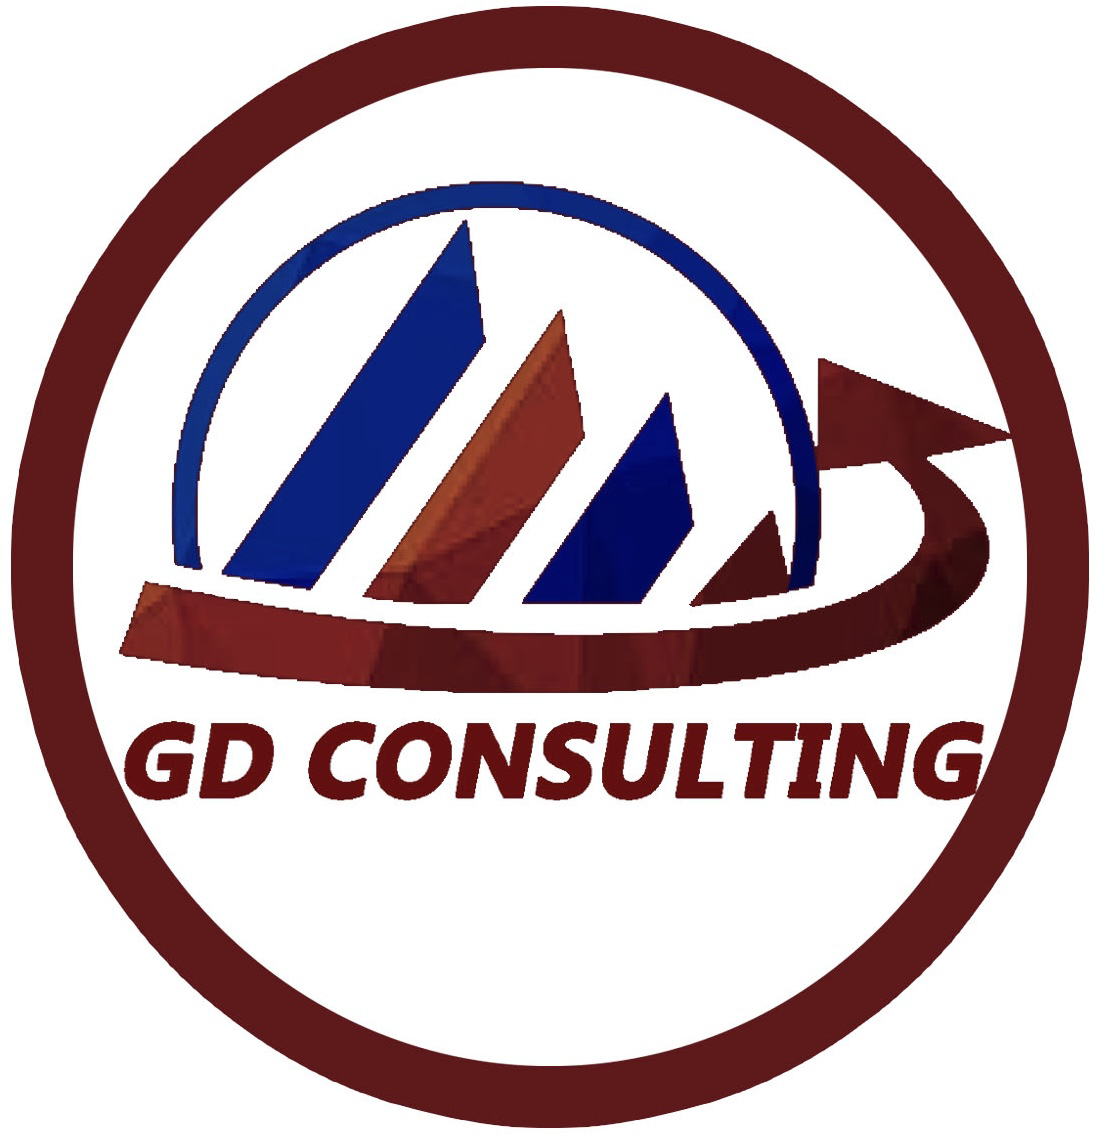 GD Consulting logo